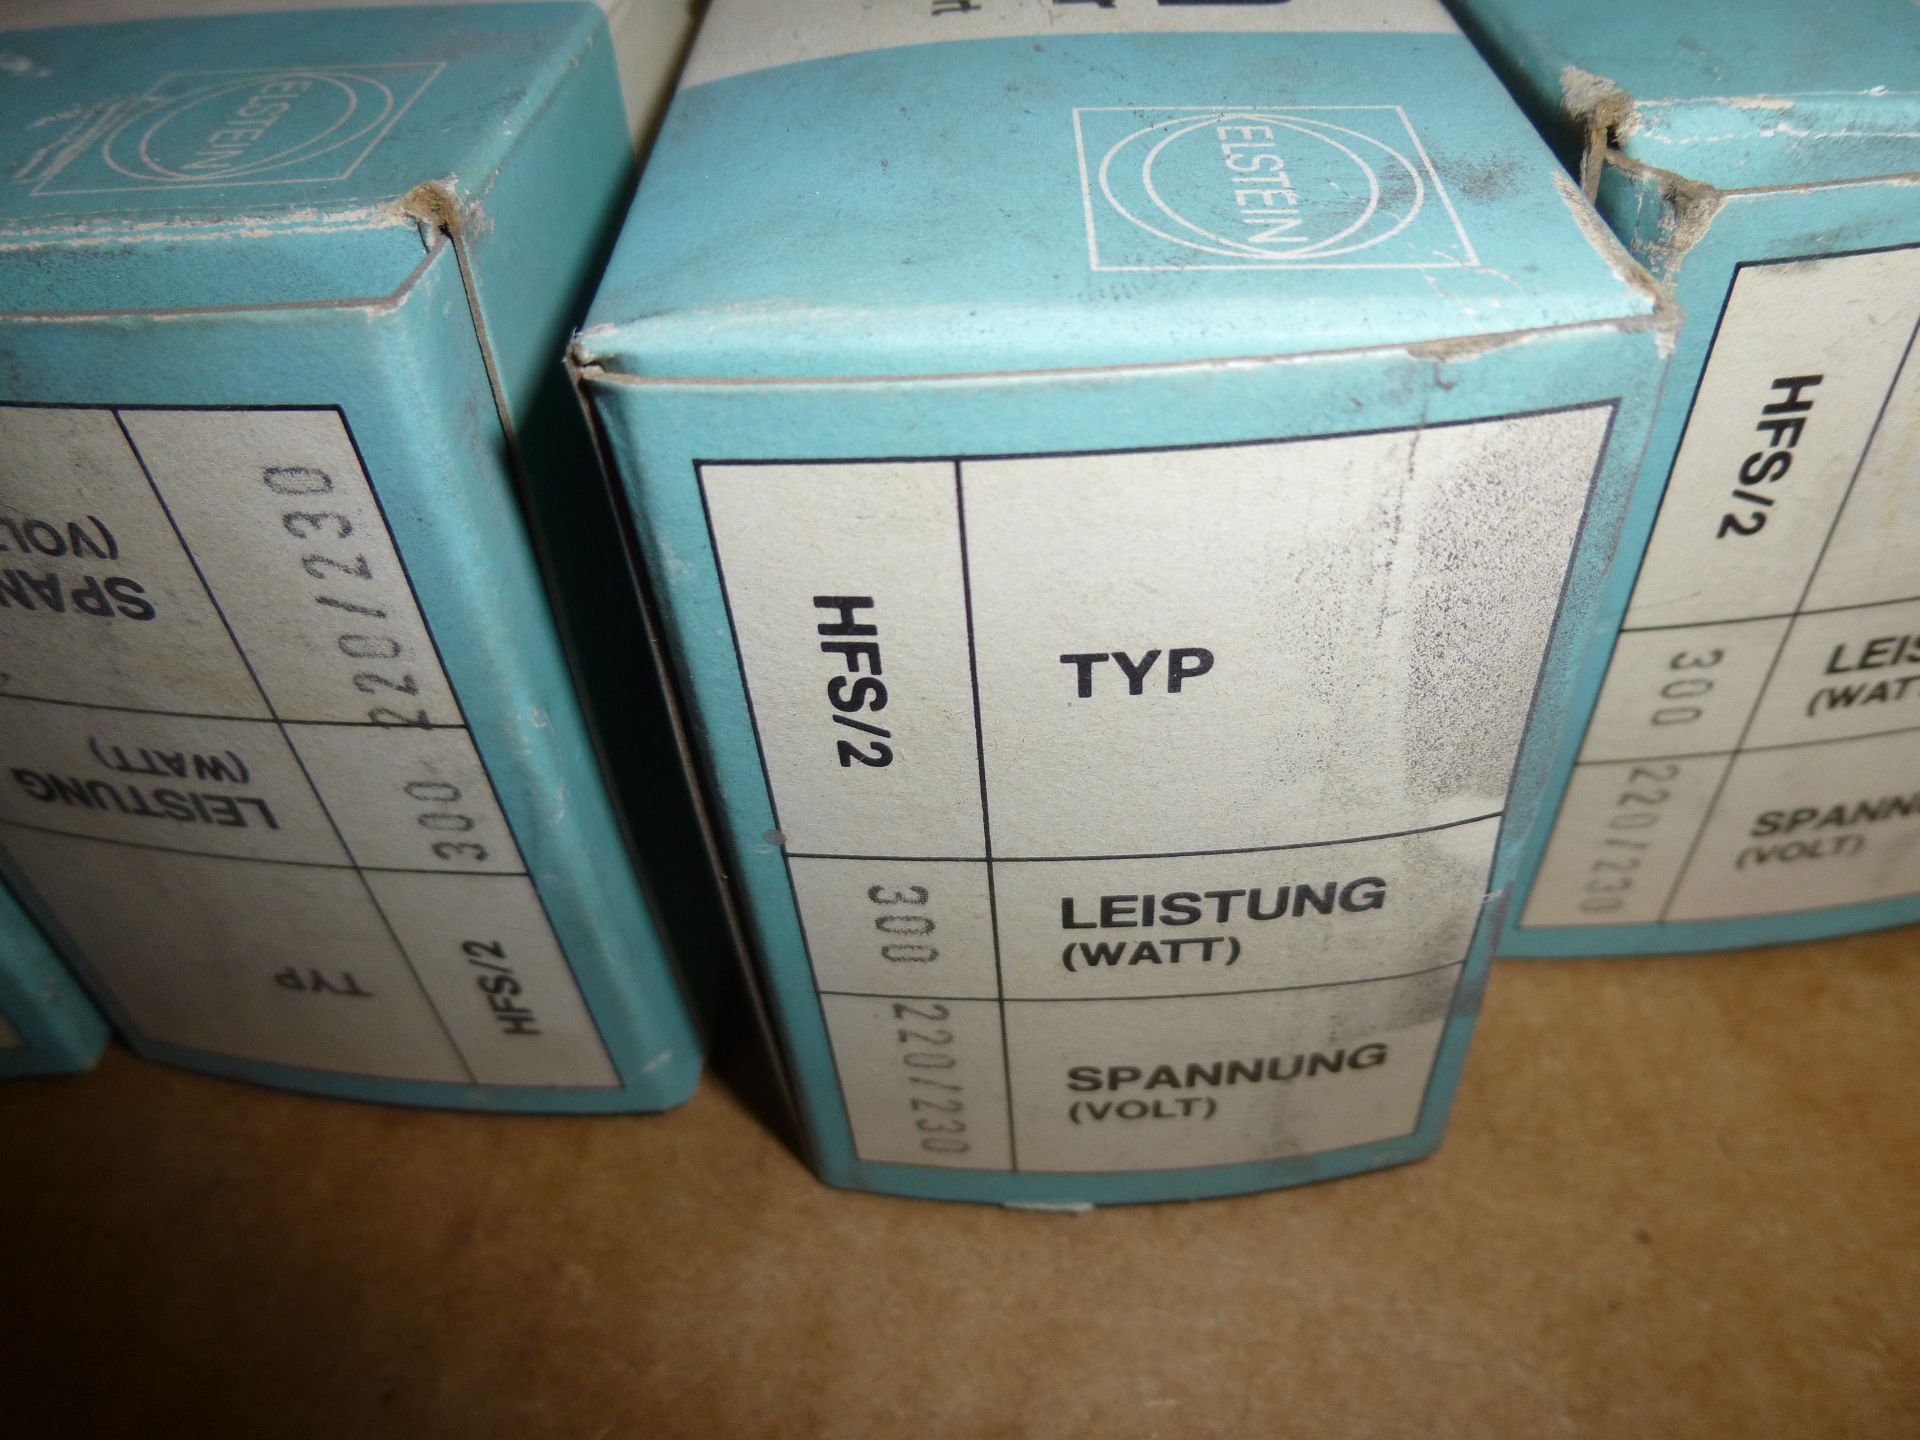 Qty 4 Elstein Model HFS/2, new in boxes, as always with Brolyn LLC auctions, all lots can be - Image 2 of 2